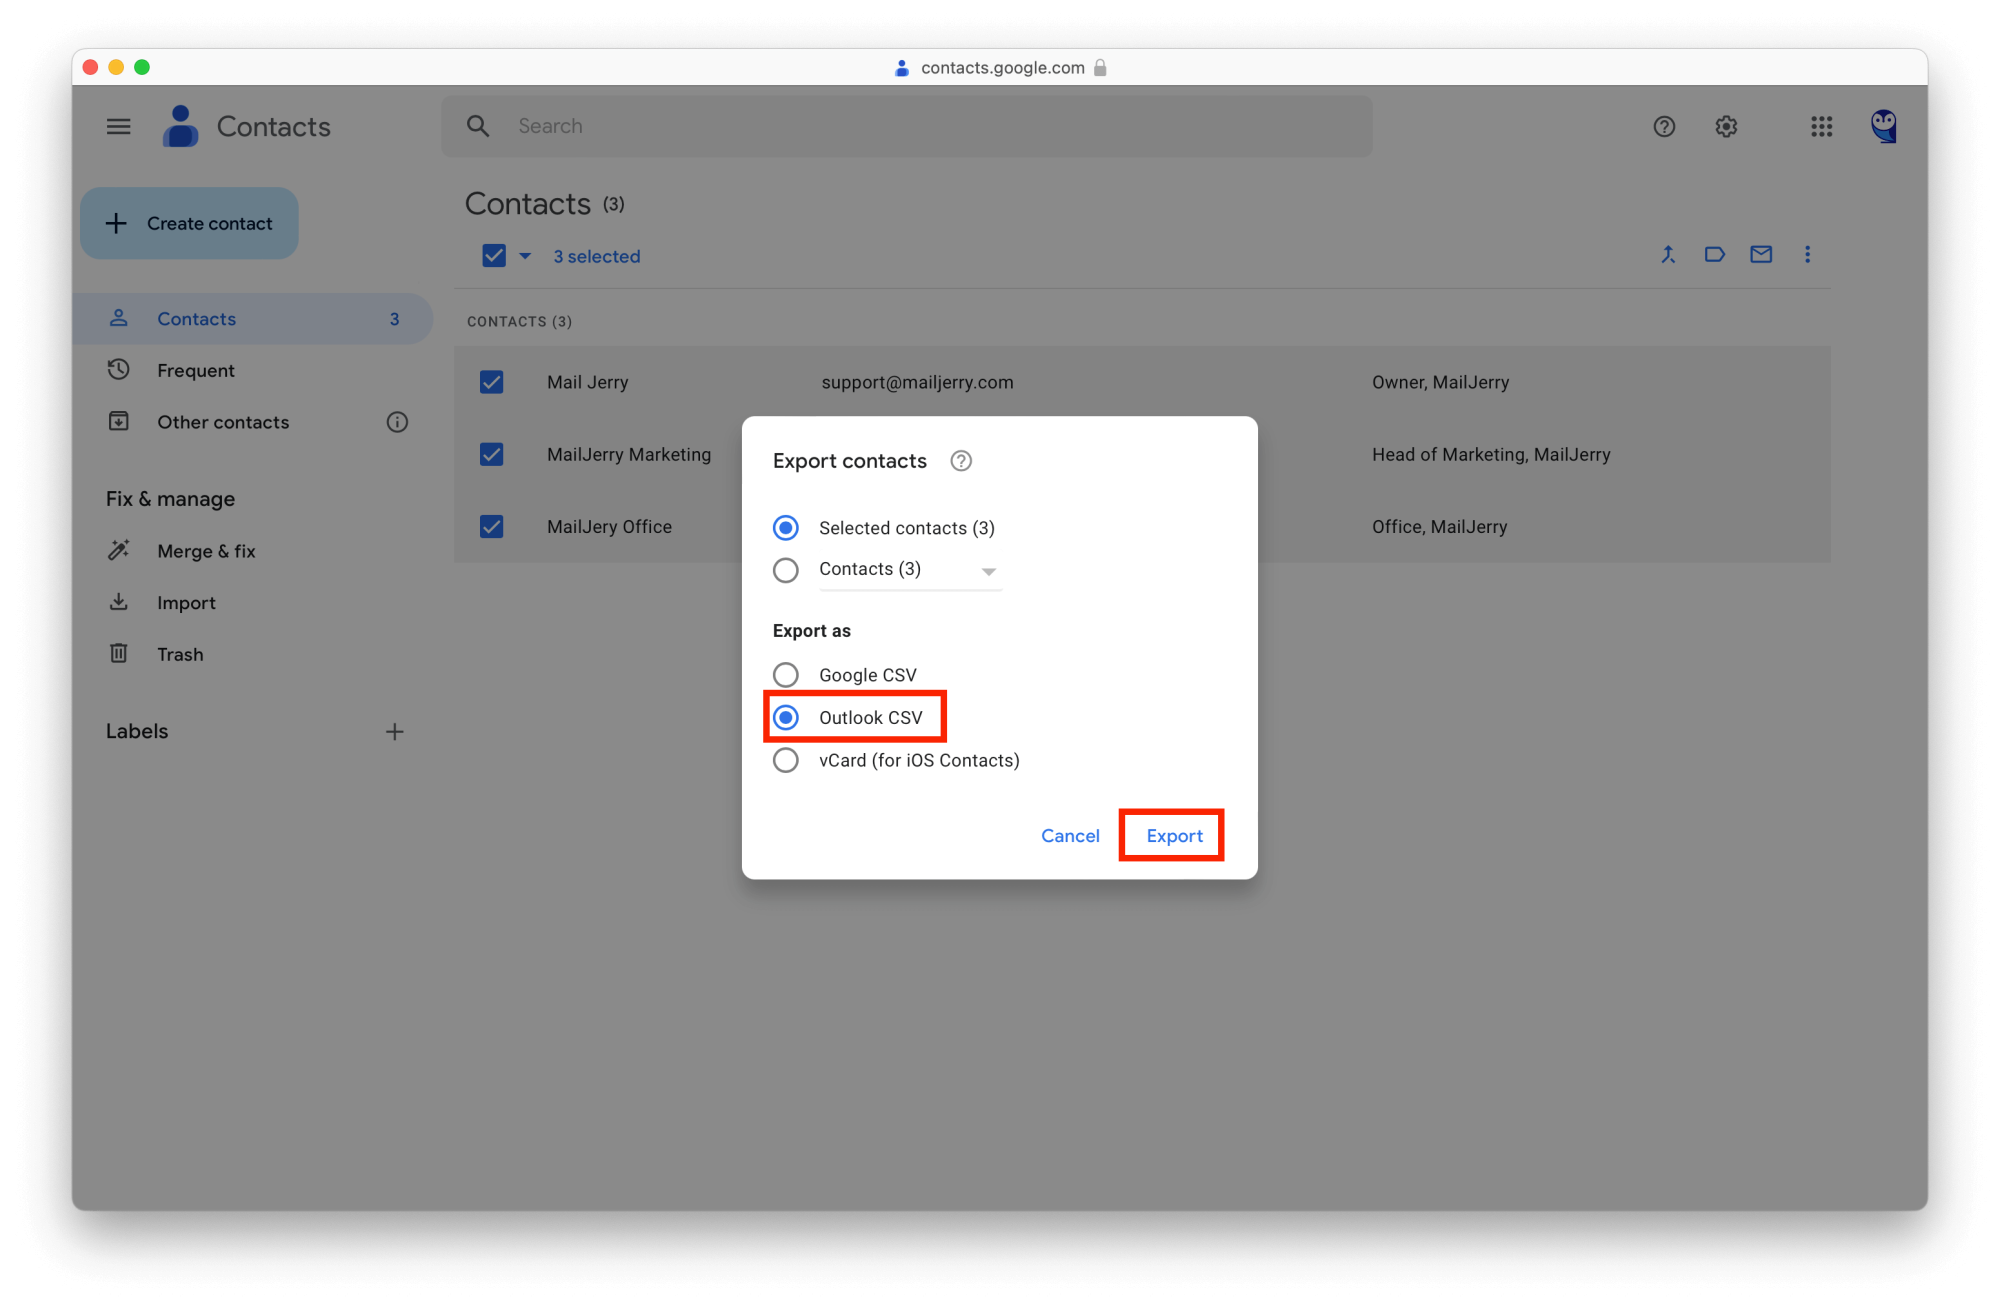 Migrate G Suite to Office 365: Export Gmail contacts – Step 03